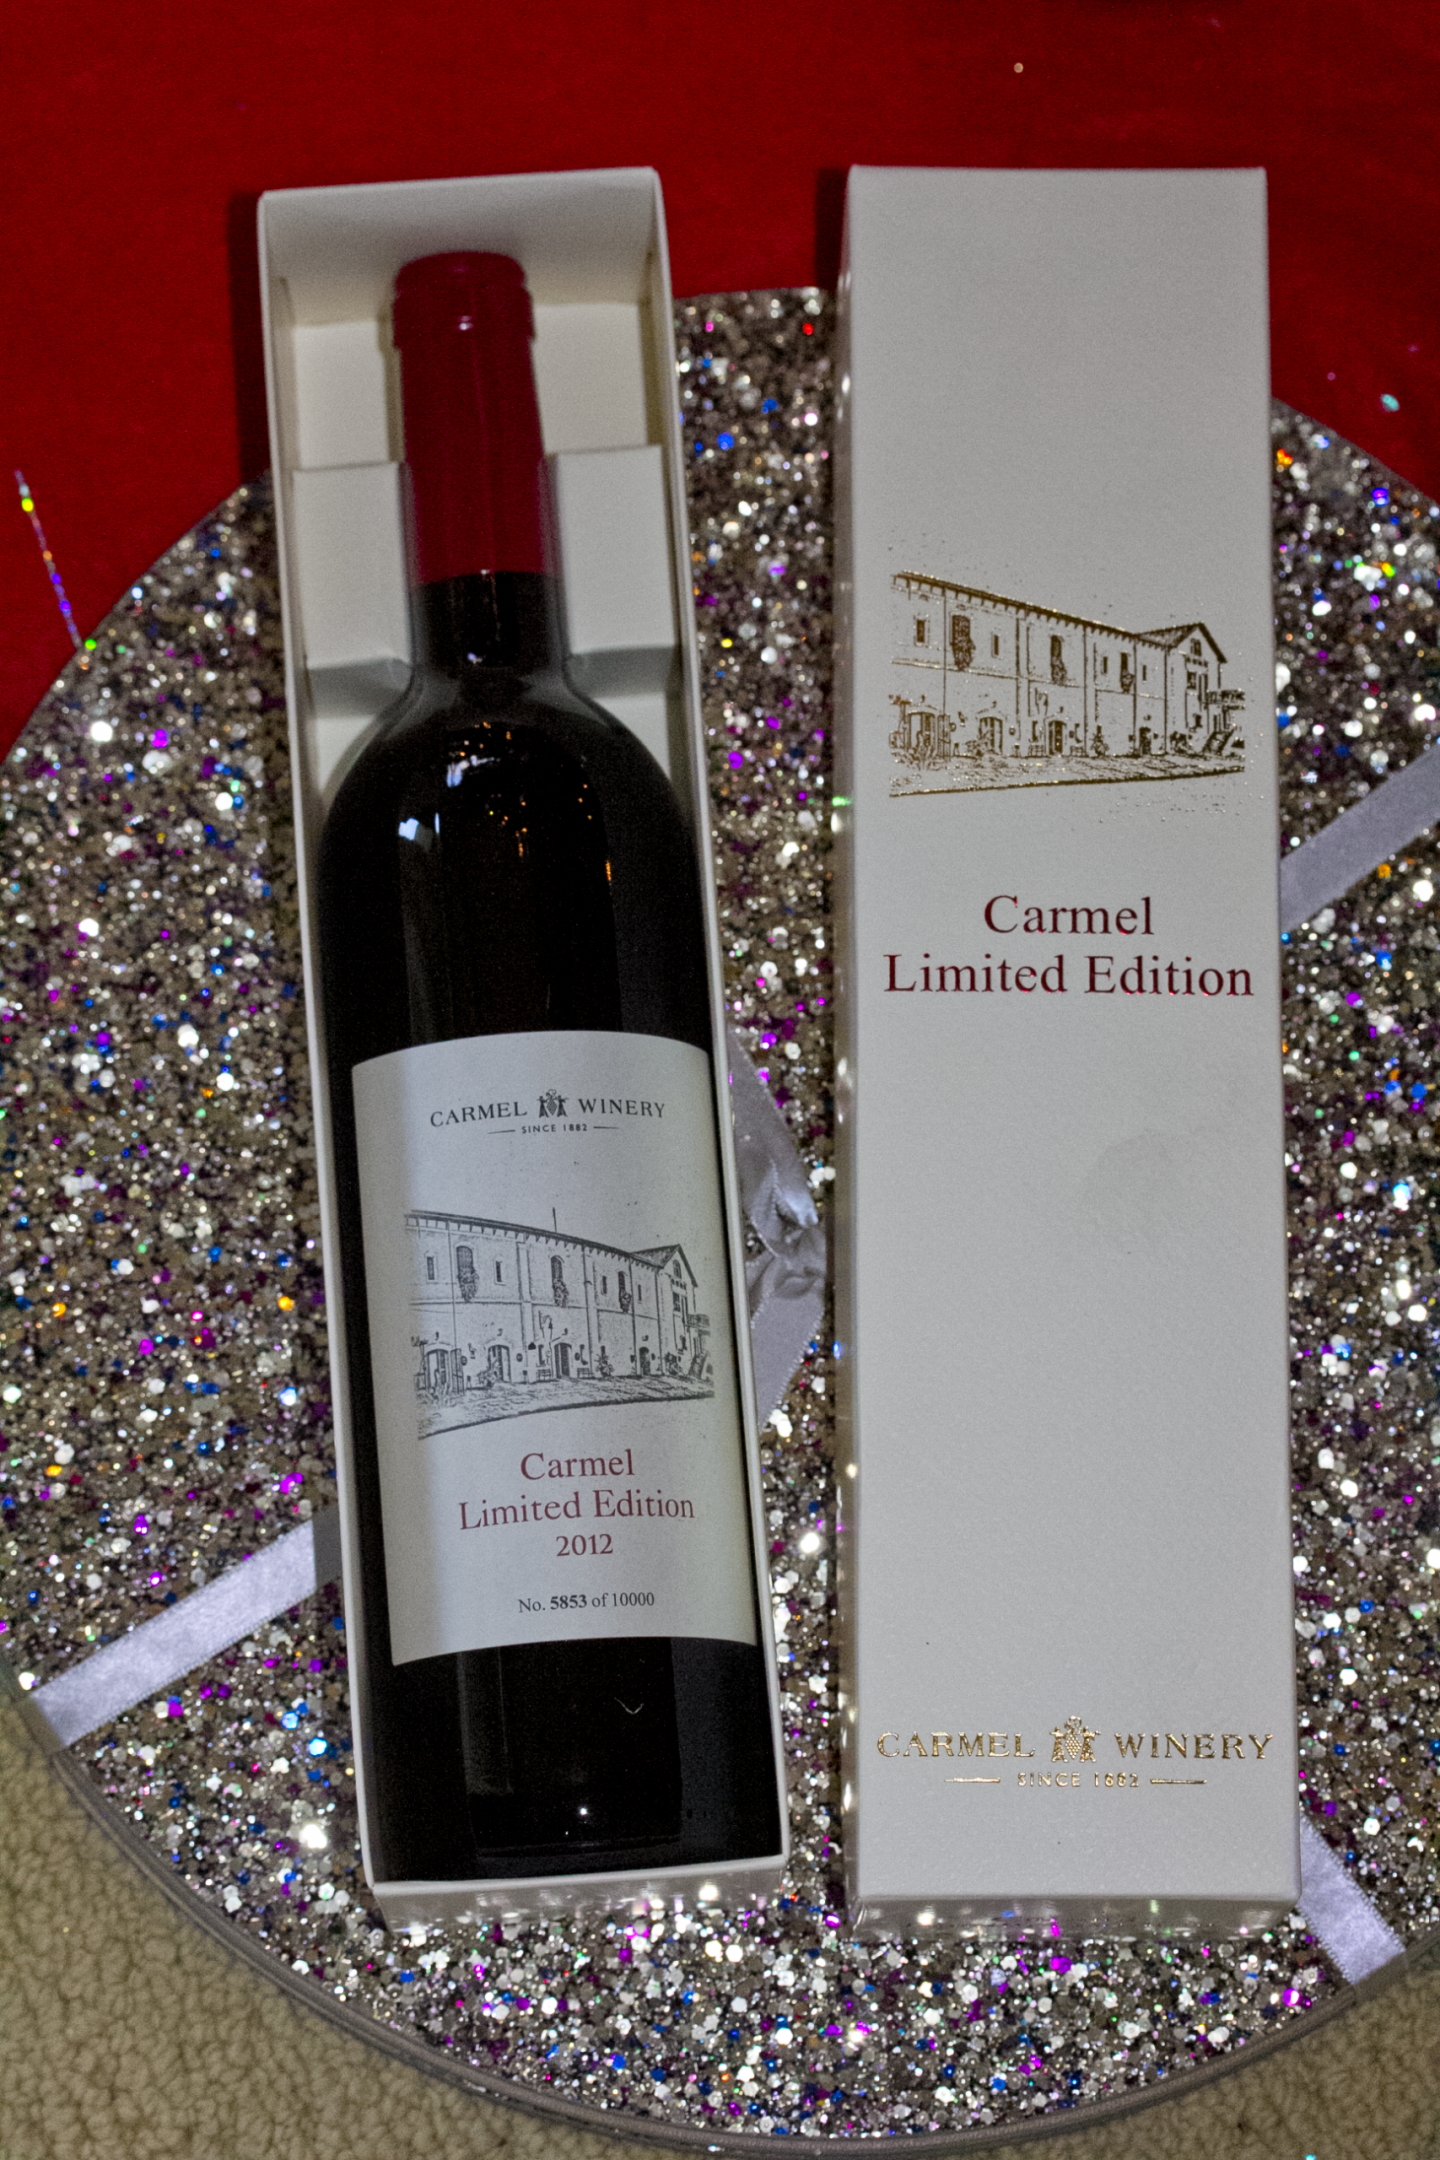 Carmel Winery Limite Edition 2012 wine holiday gift guide